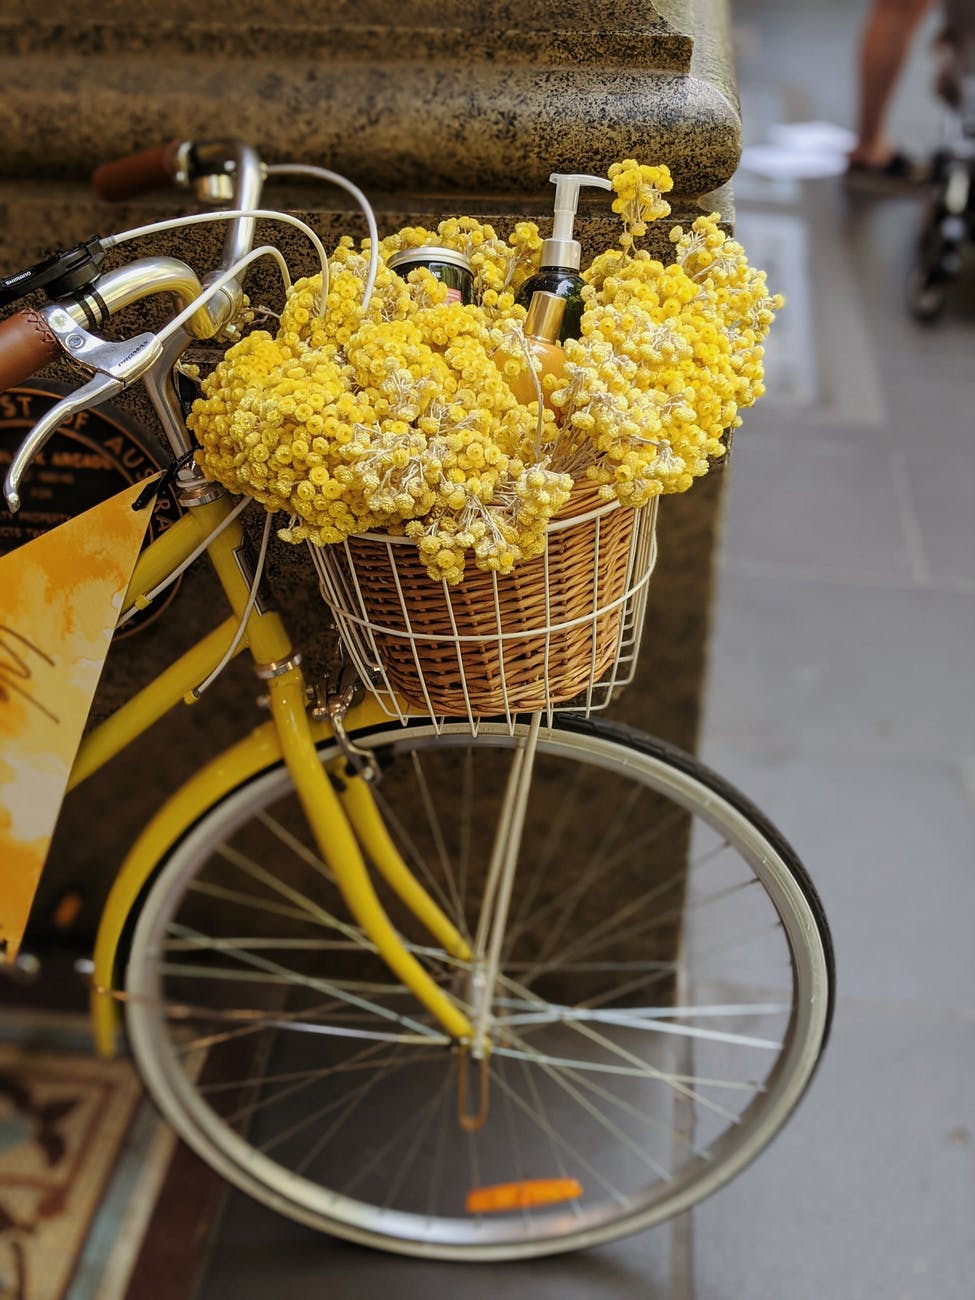 yellow flowers in brown woven basket on bicycle CYCLE AT UNIVERSITY